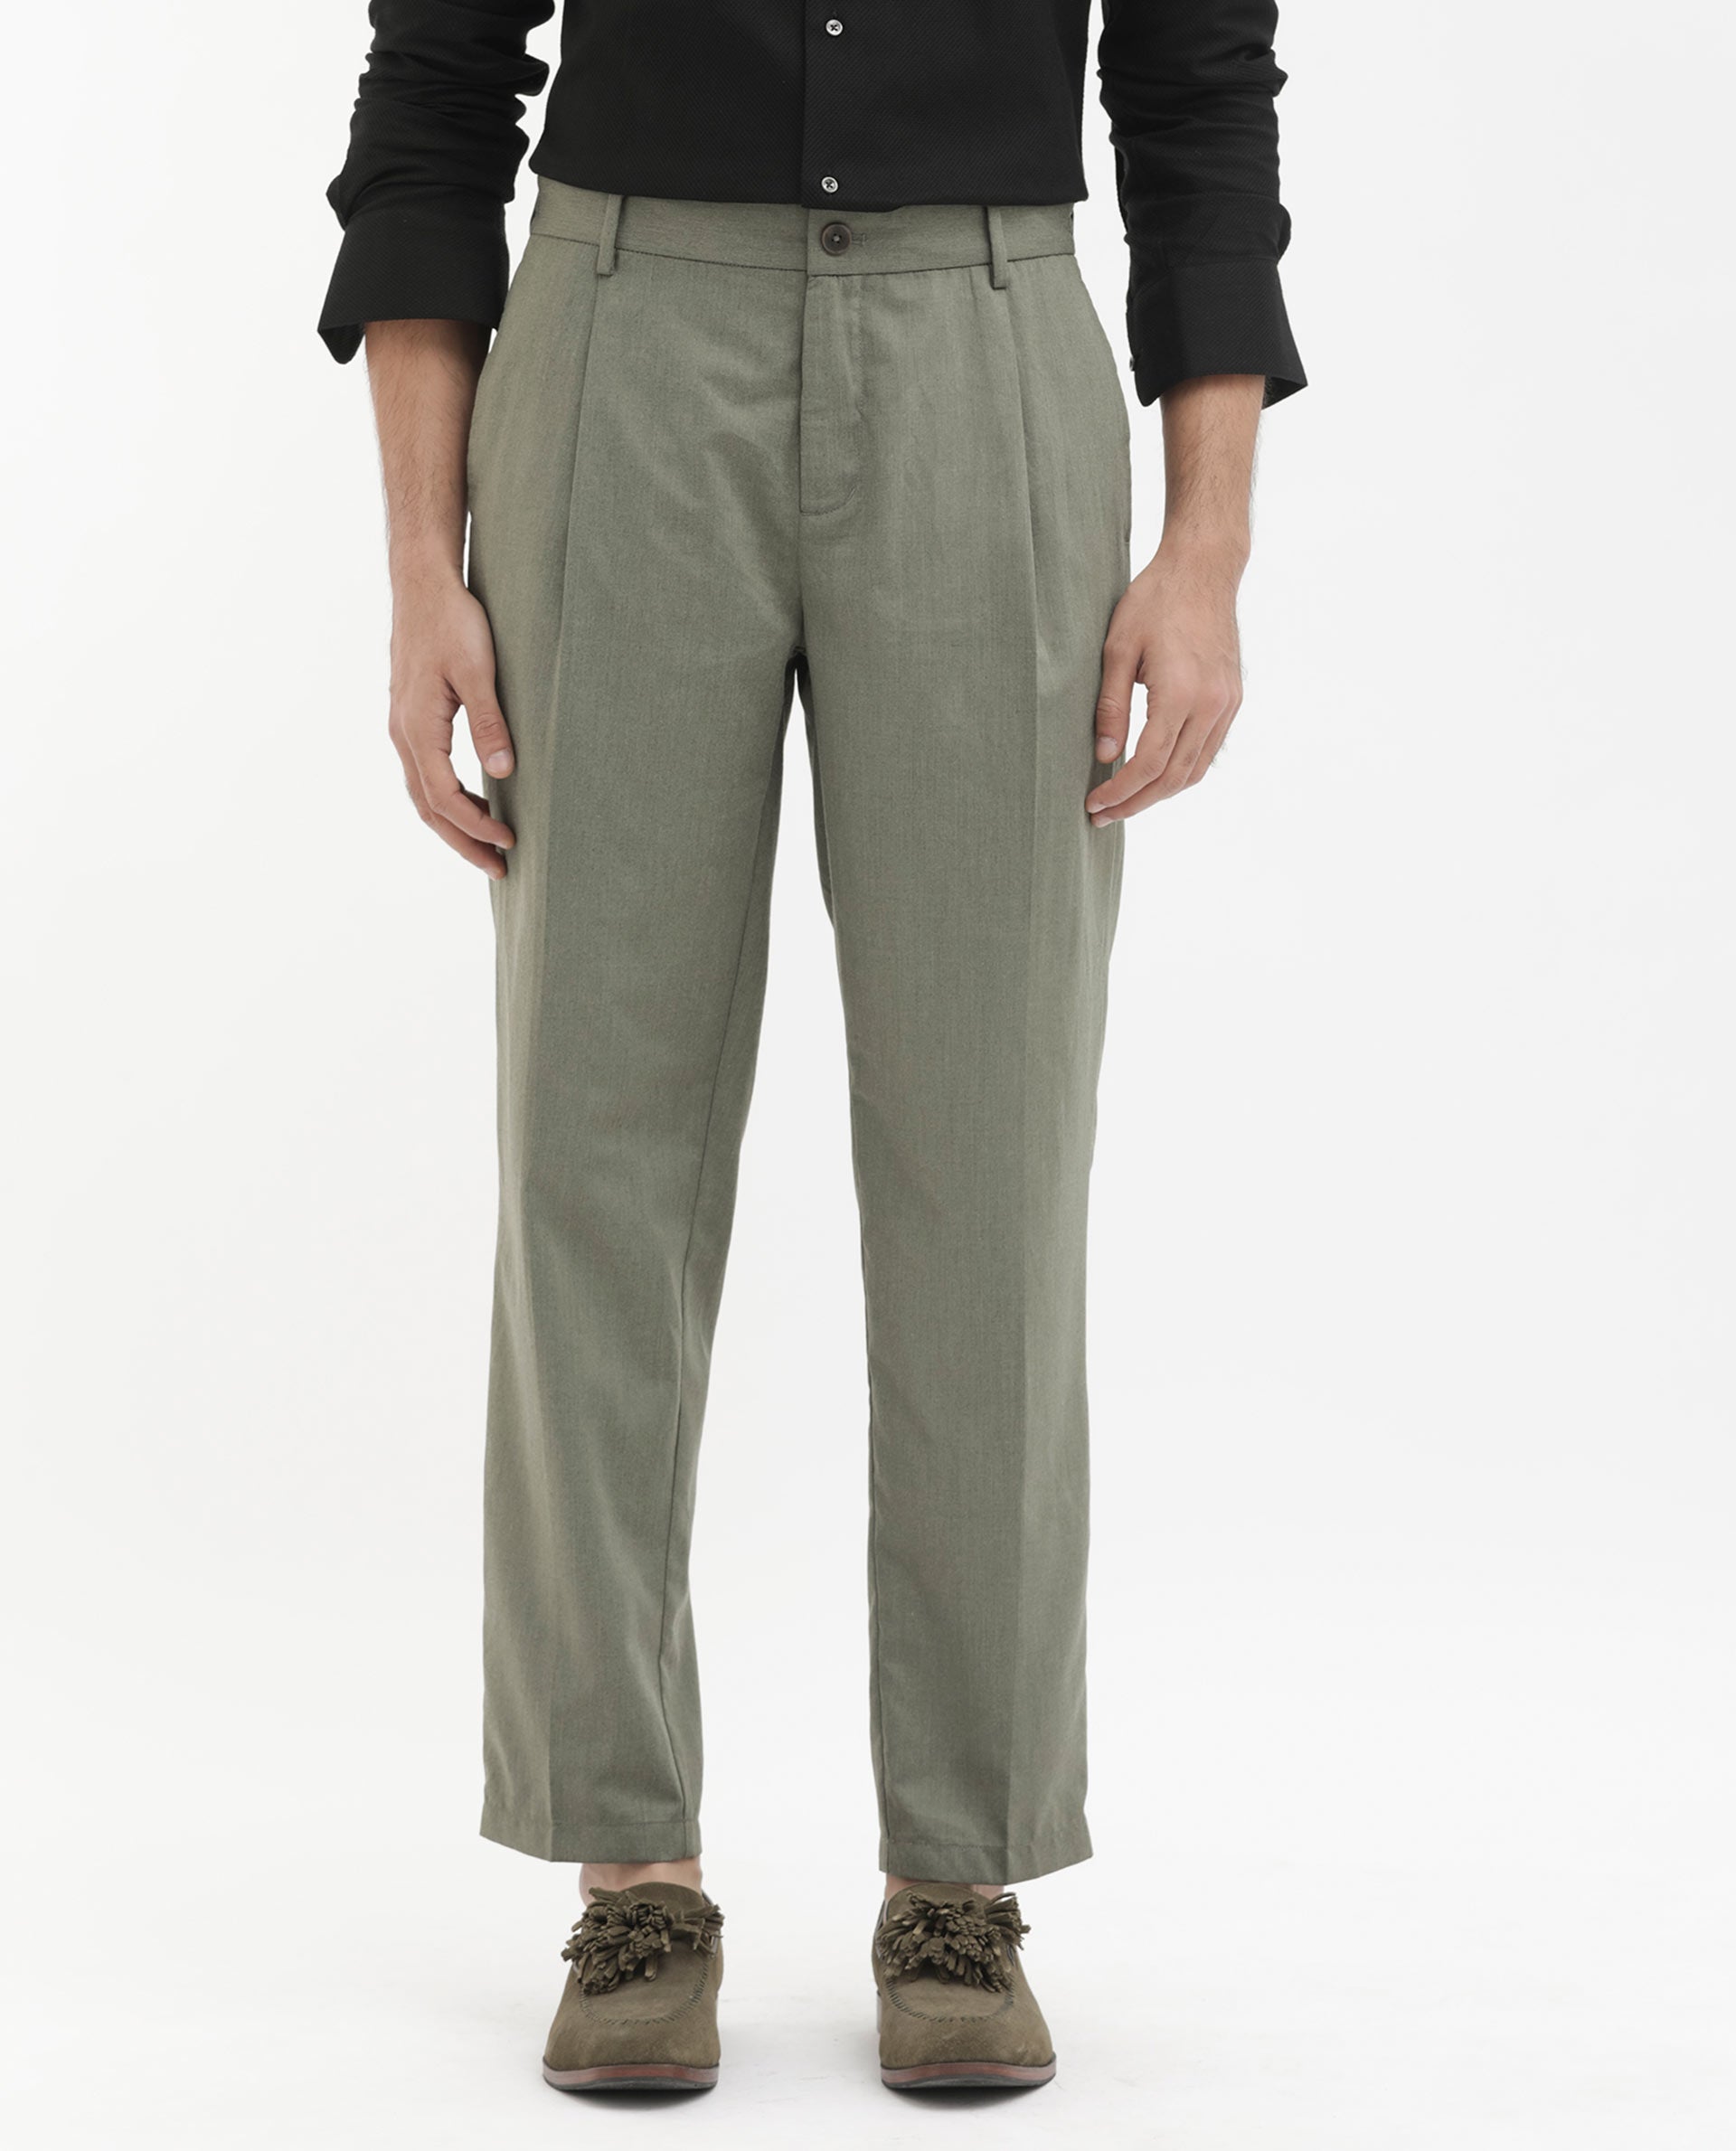 Buy INTUNE Solid Cotton Regular Fit Girls Pants | Shoppers Stop